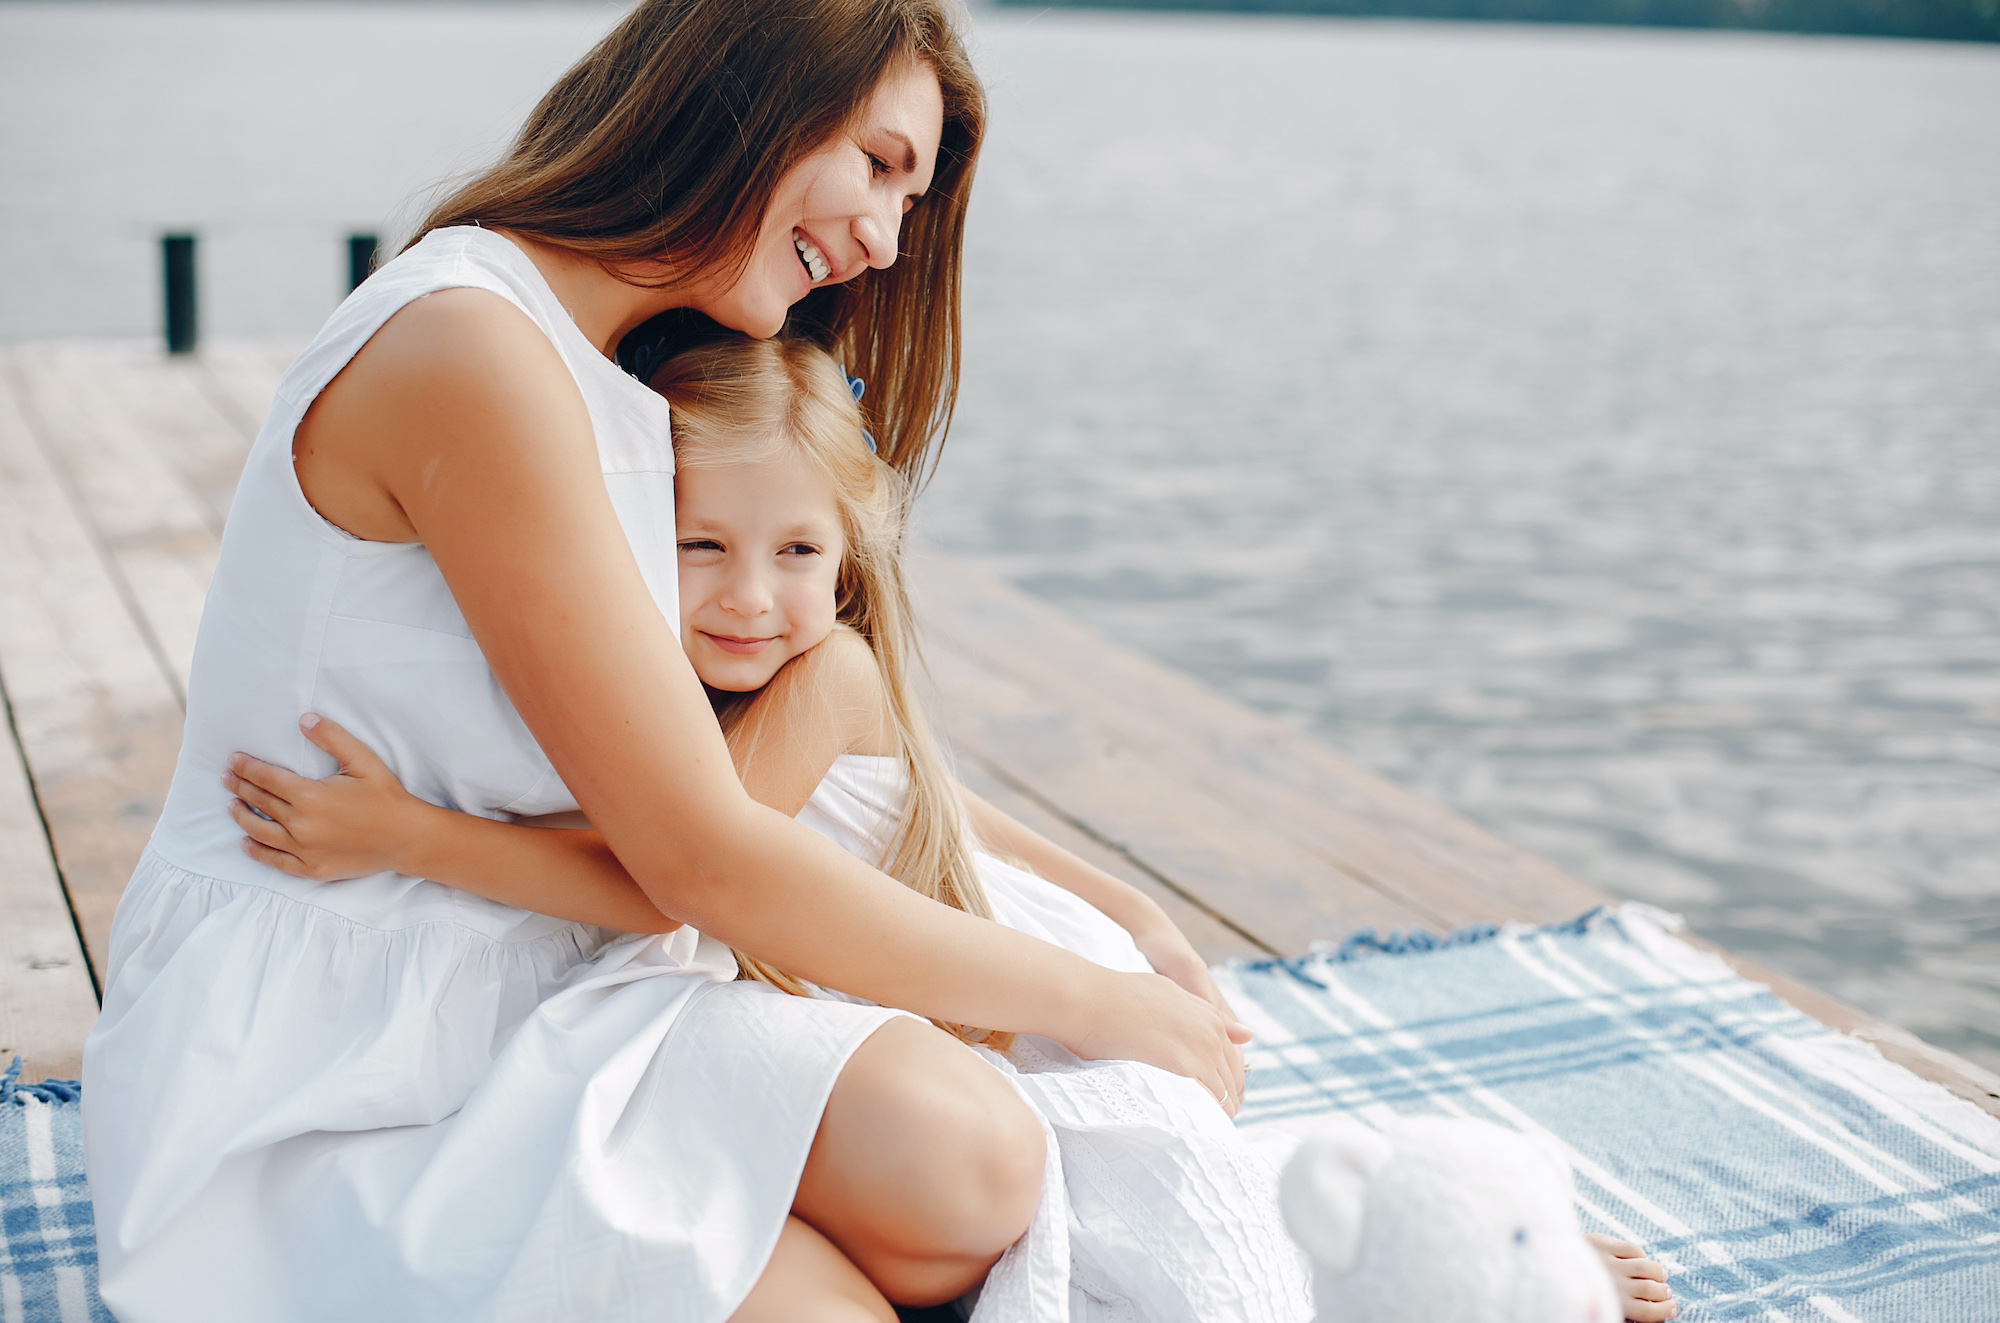 Celebrate Your Mother this Mother’s Day by Gifting Her a Trip to Cape Coral